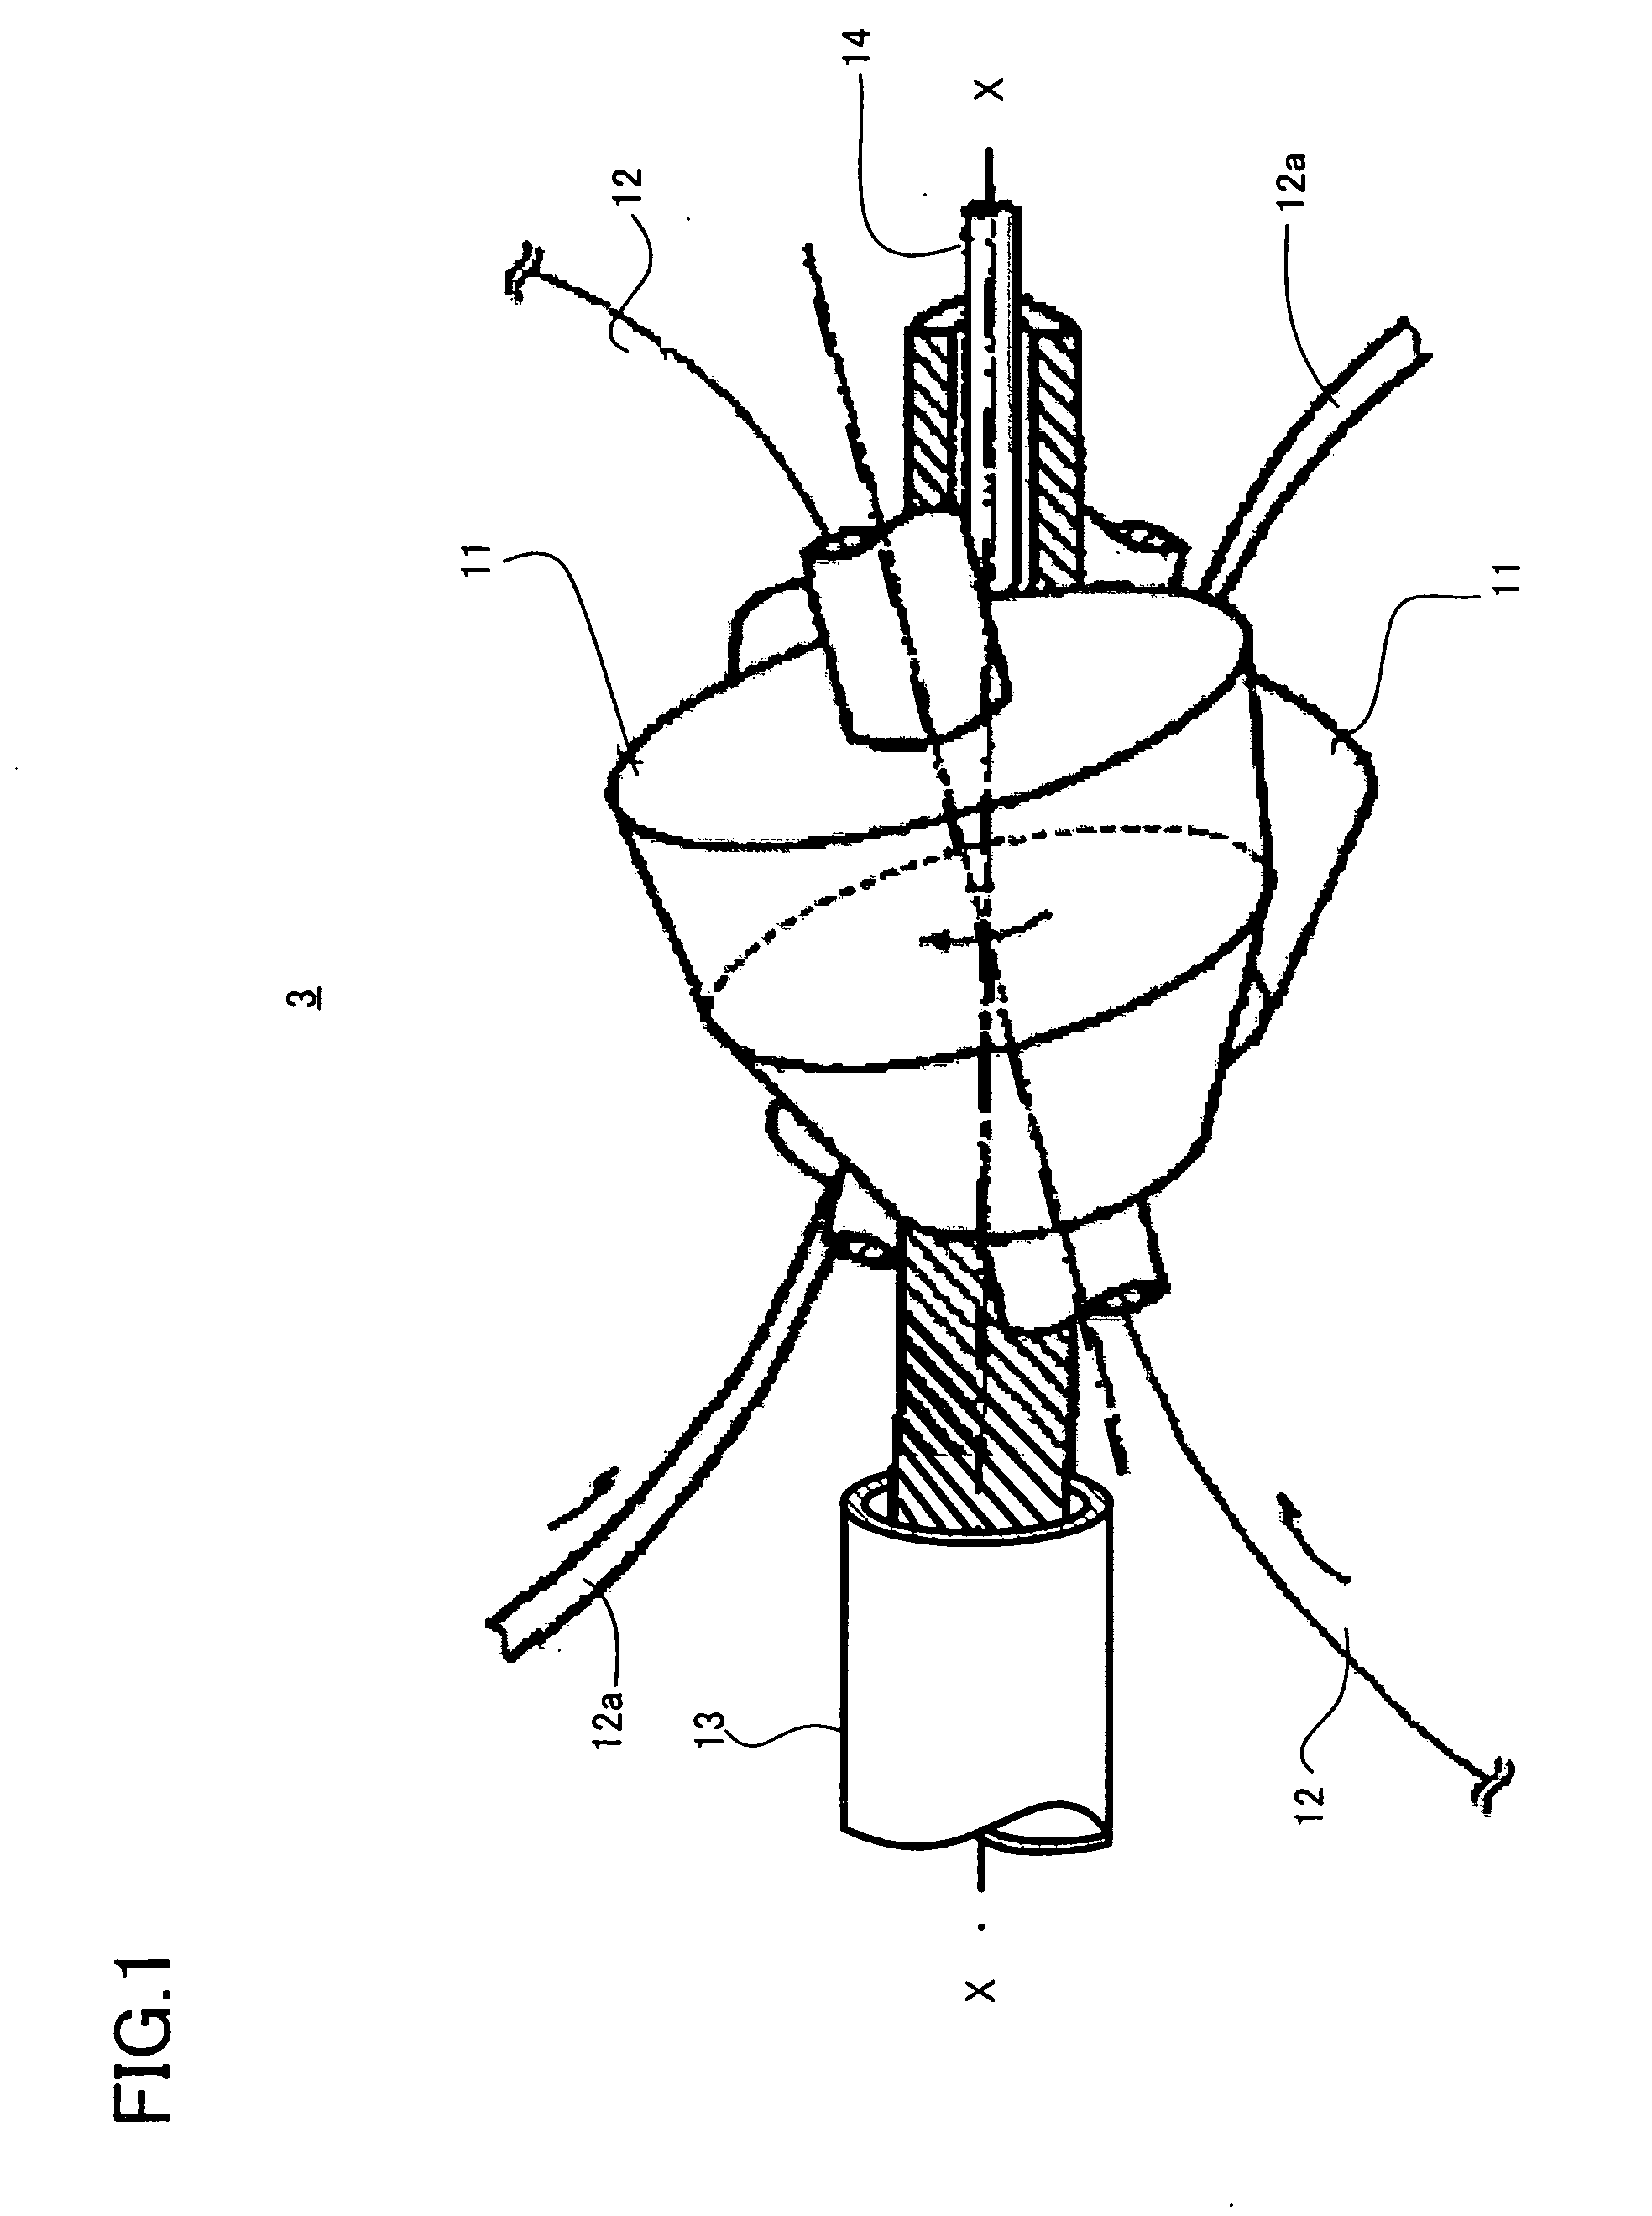 System For Supplying Lubricant, Apparatus For Manufacturing Seamless Pipes Or Tubes, And Method Of Manufacturing Seamless Pipes Or Tubes